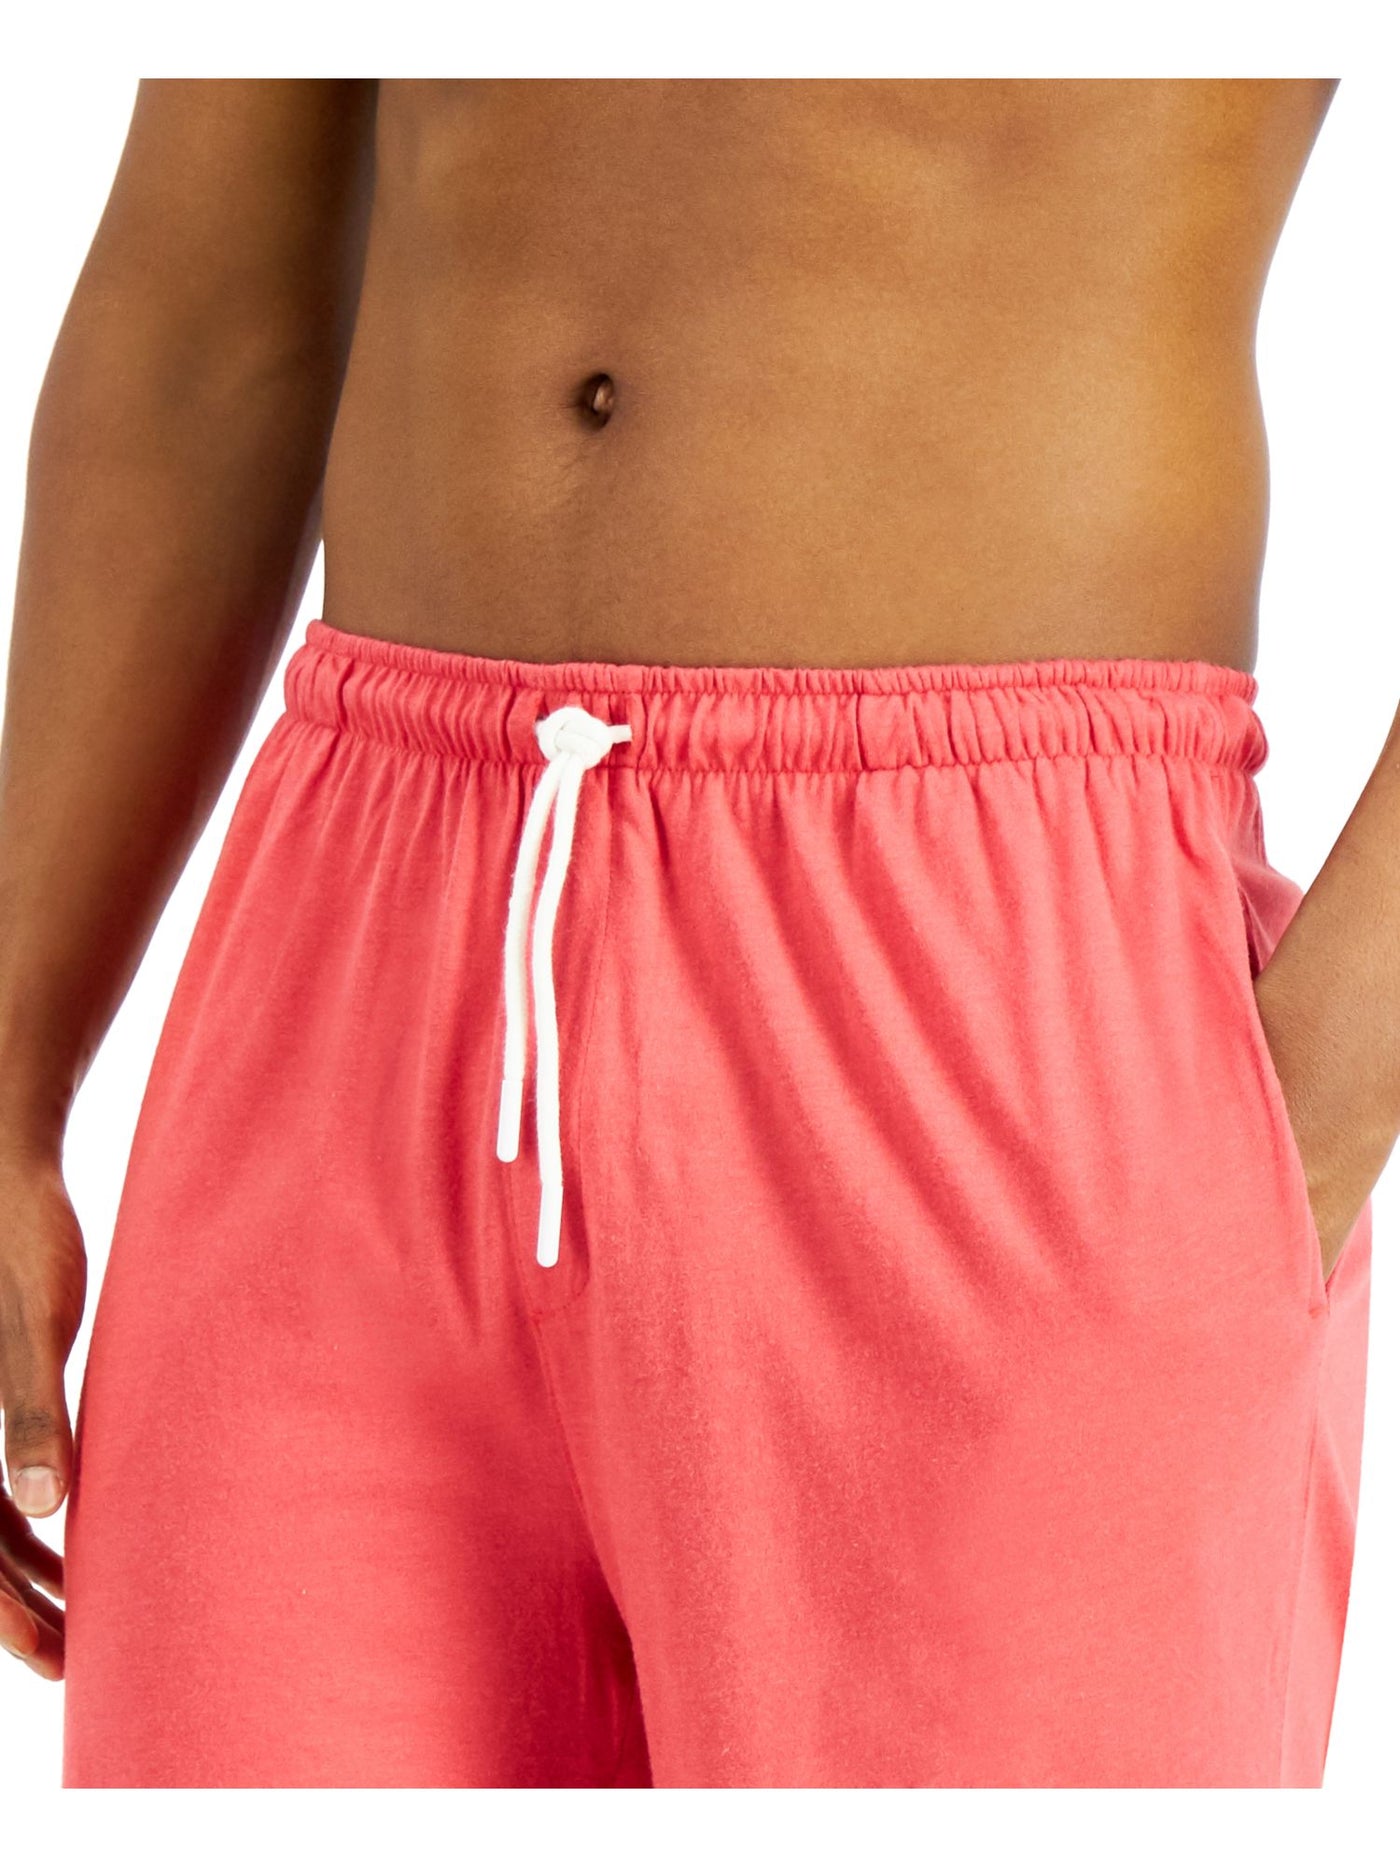 CLUBROOM Intimates Coral Cotton Blend Pocketed Sleep Shorts L